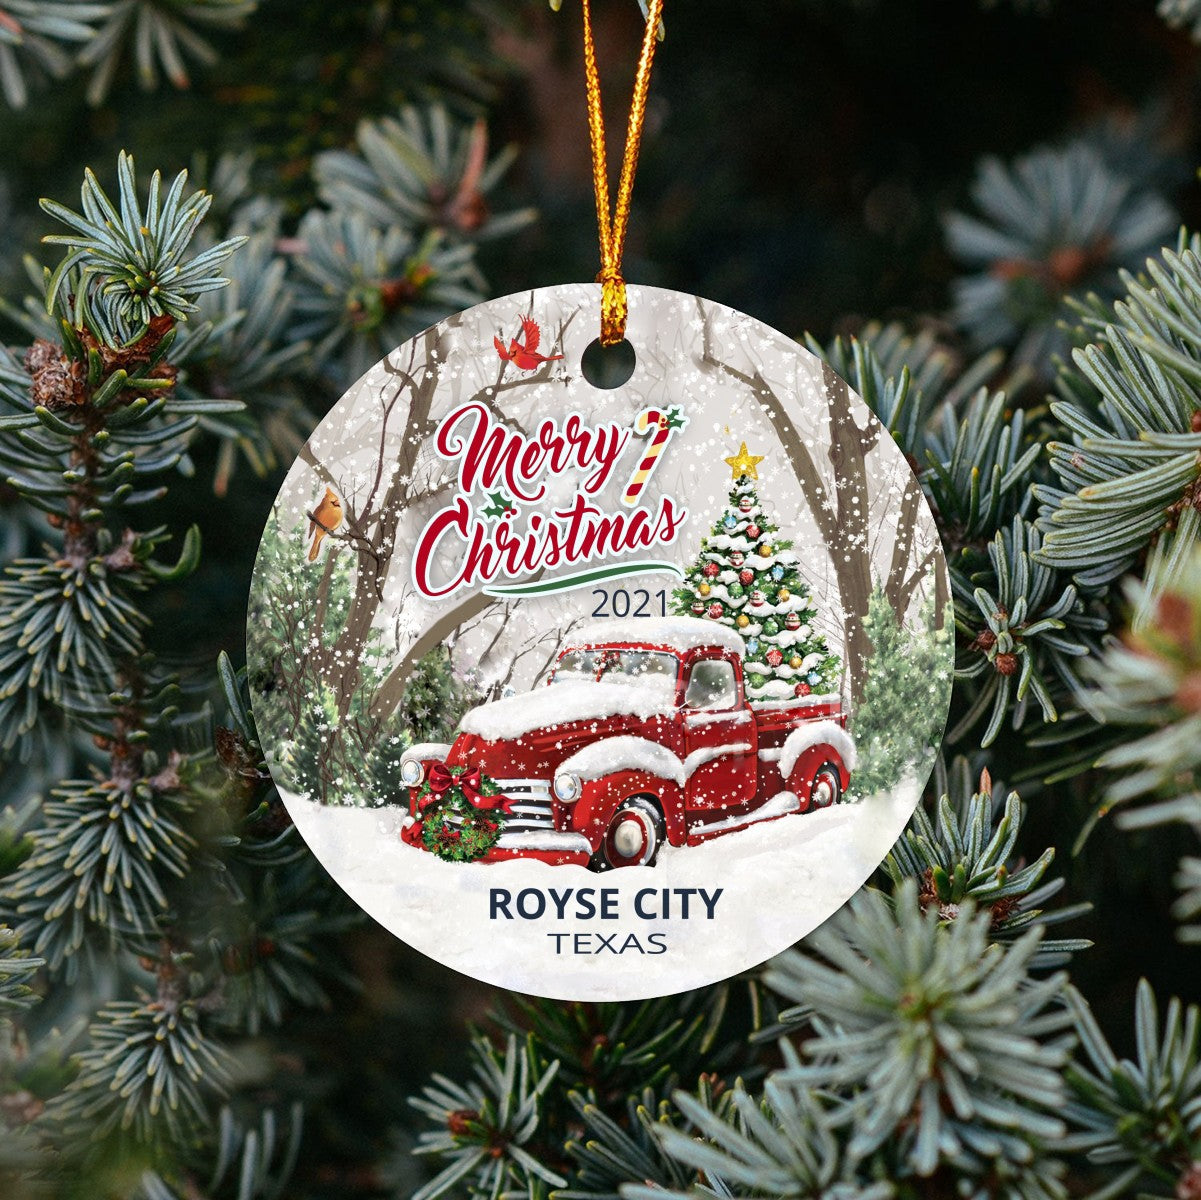 Christmas Tree Ornaments Royse City - Ornament With Name City, State Royse City Texas TX Ornament - Red Truck Xmas Ornaments 3'' Plastic Gift For Family, Friend And Housewarming